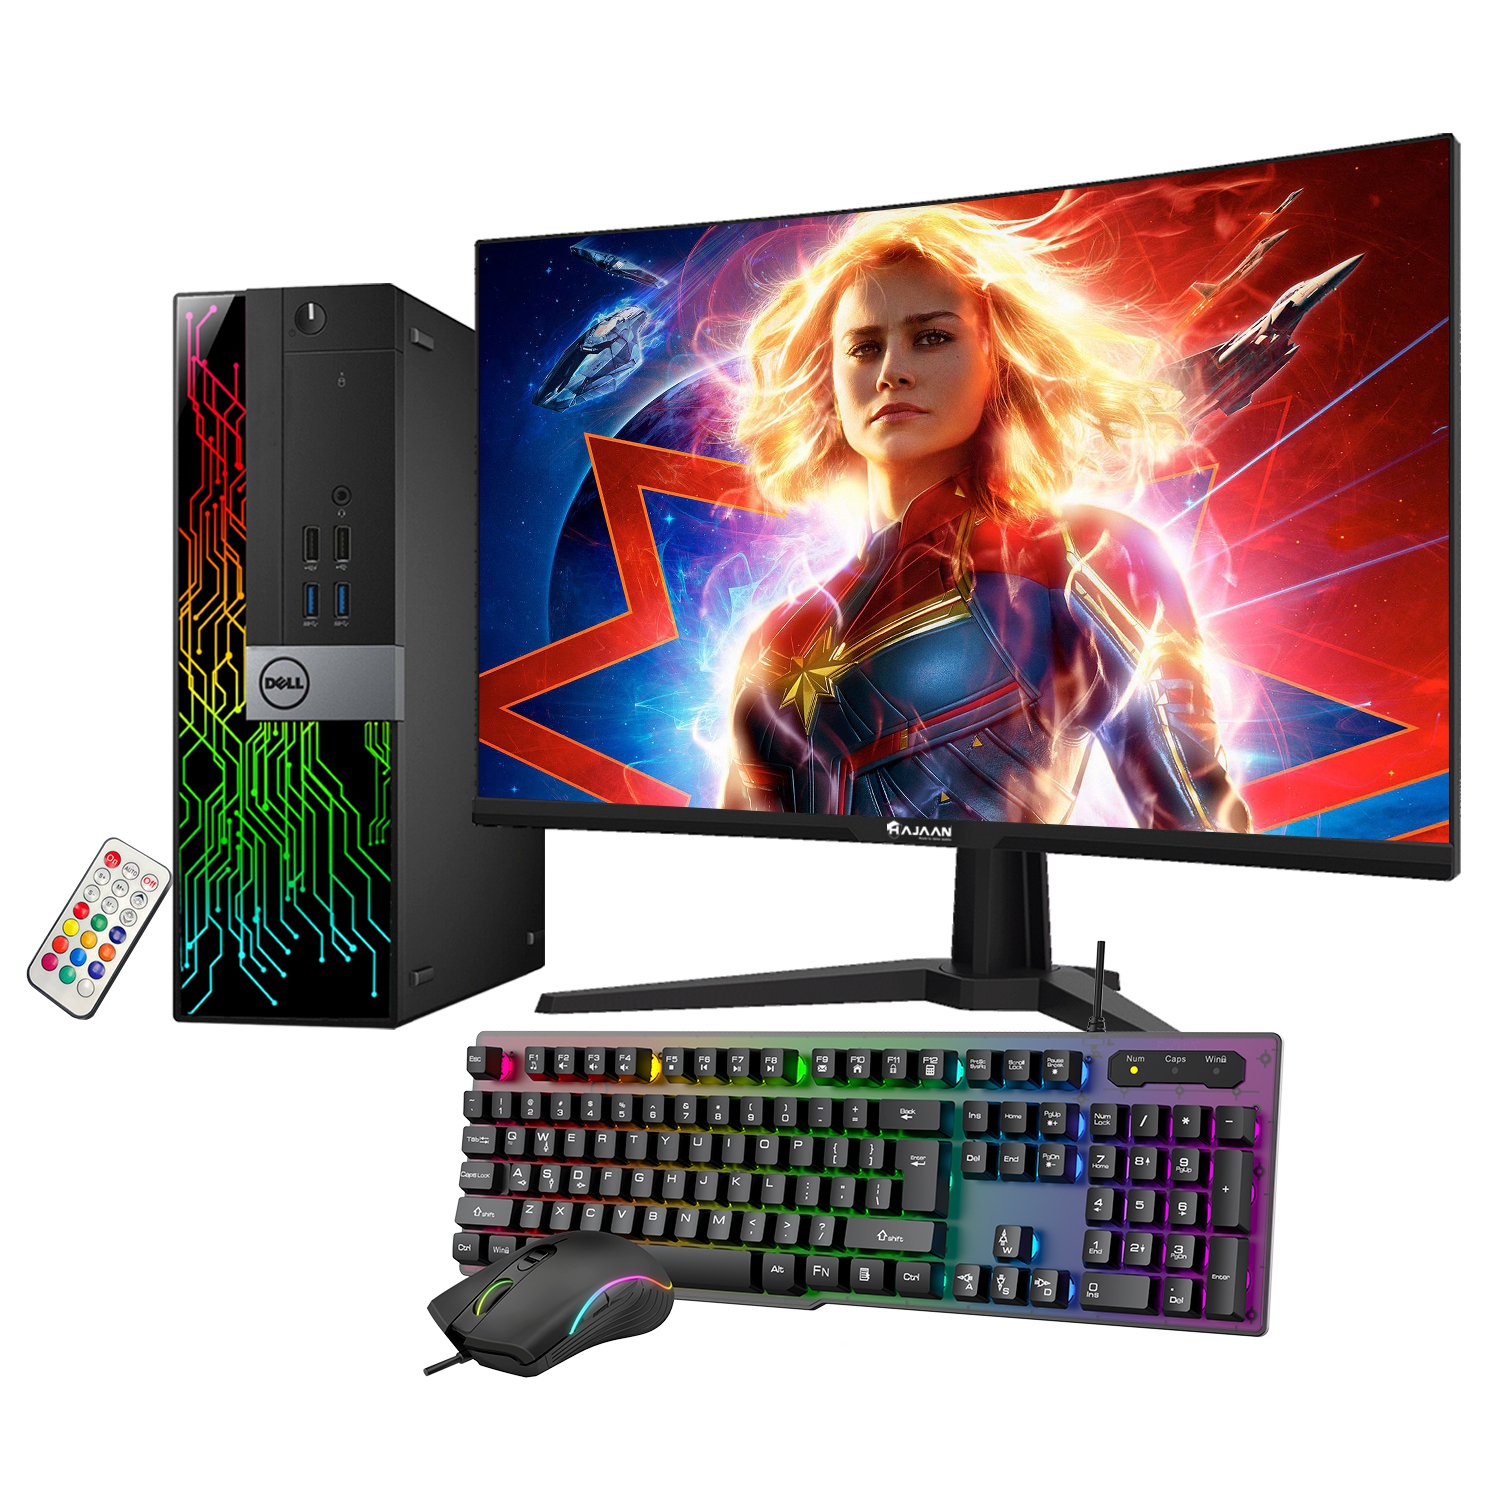 Refurbished (Good) - Dell OptiPlex SFF Computer with 27 Inch Gaming Monitor i5 6500 3.2 GHz NVIDIA GT 1030 2GB 16GB RAM 512GB SSD Win 10 Pro WIFI, HAJAAN Keyboard & Mouse